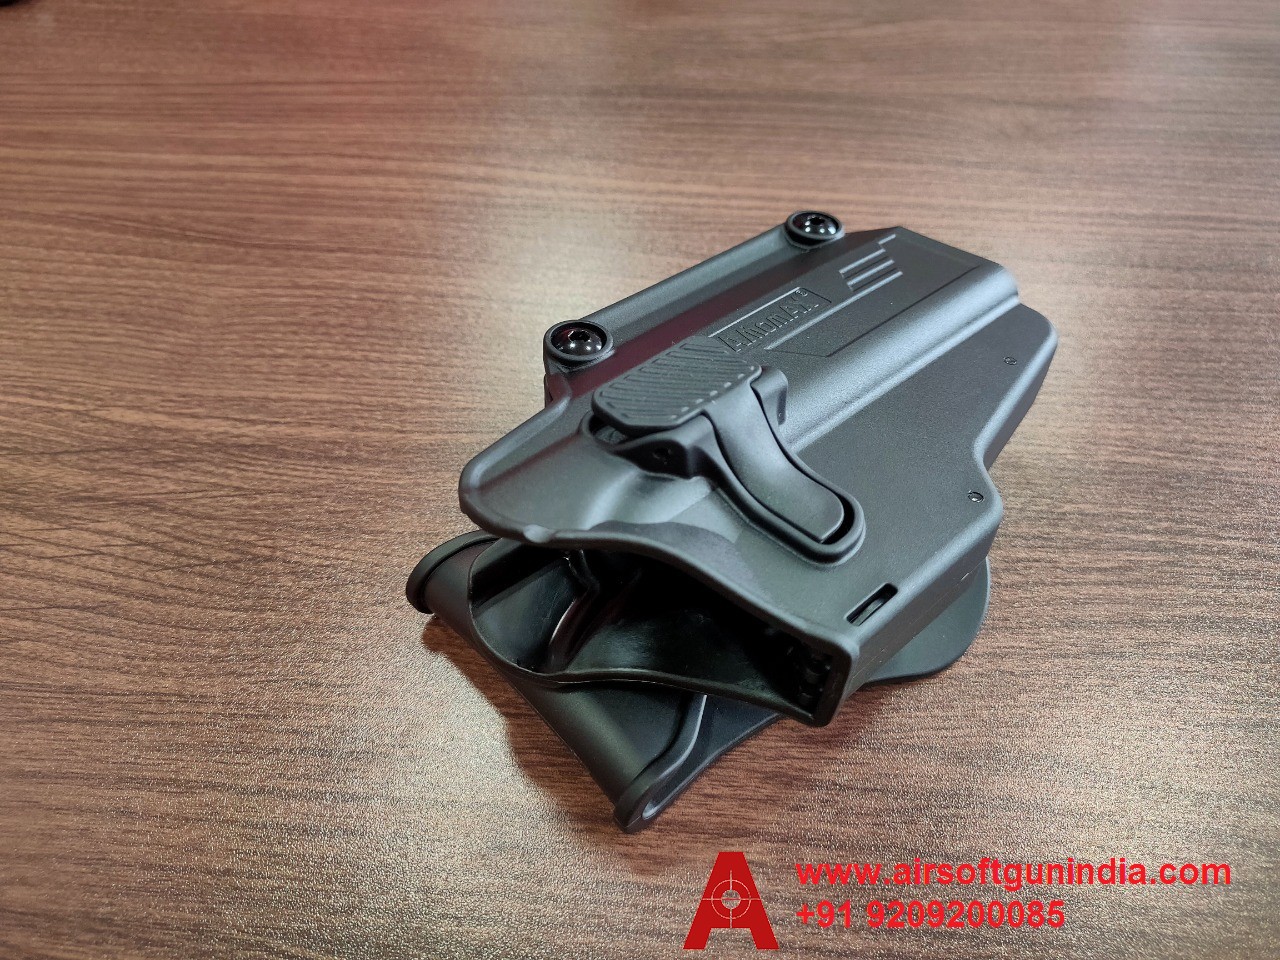 Holster For Colt Special Combat 1911 Air Pistol By Airsoft Gun India